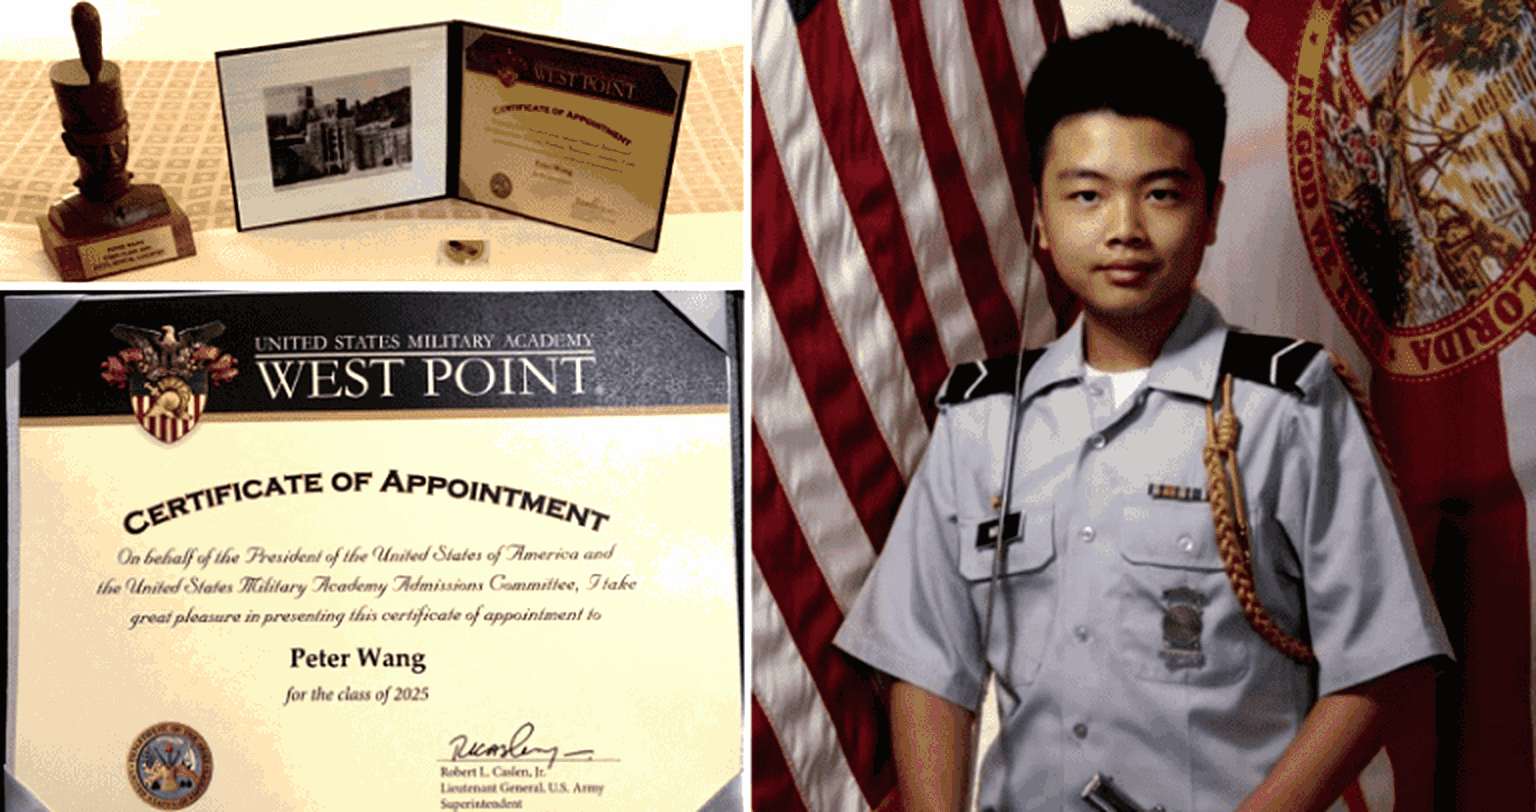 West Point Admits Fallen Hero Peter Wang For Saving Students in Florida Shooting